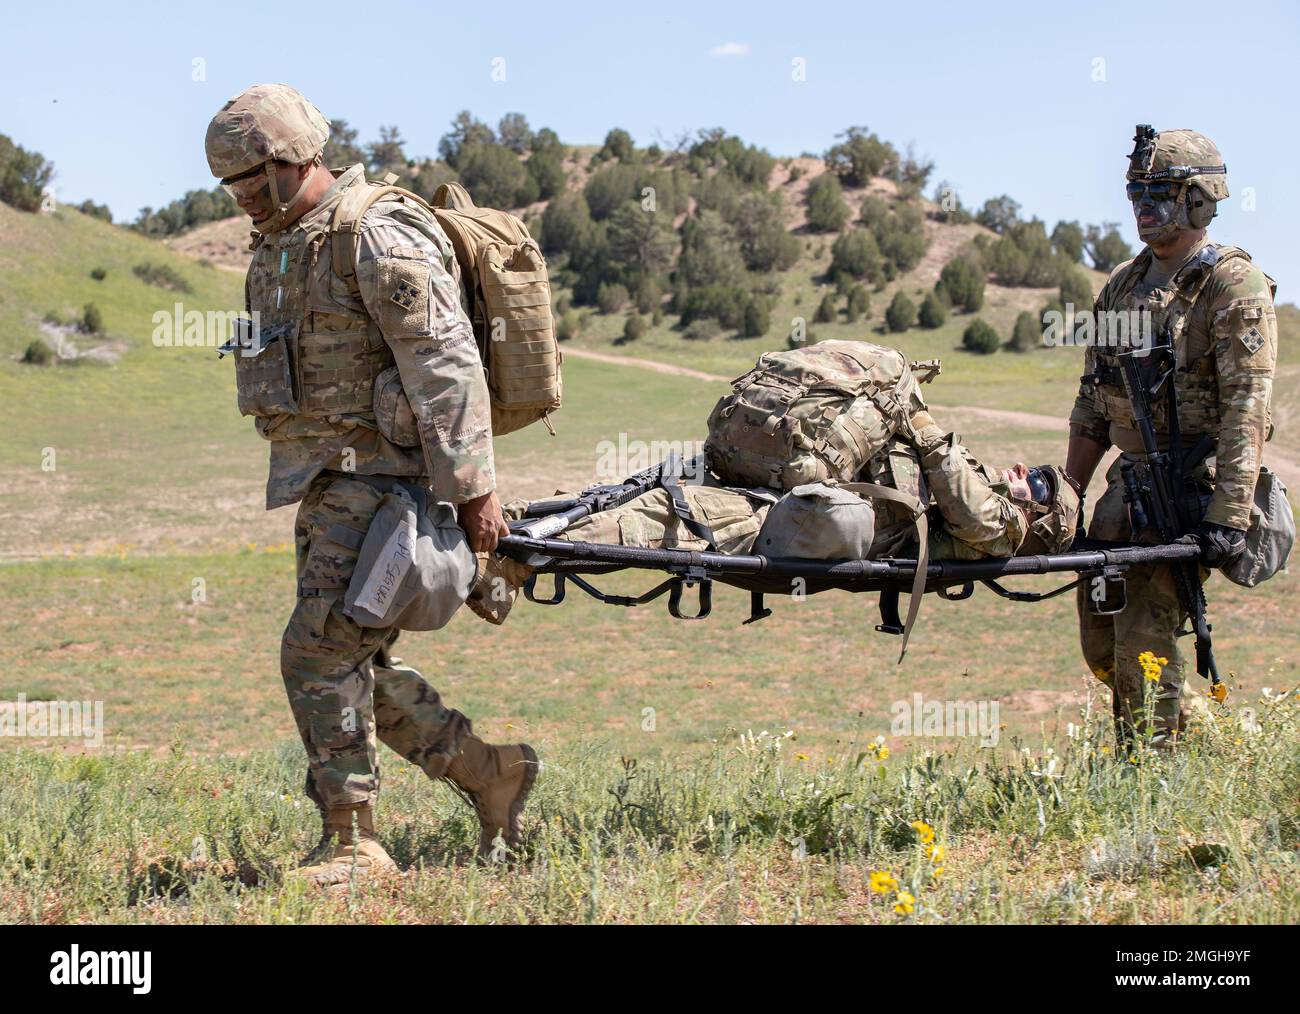 Combat medics assigned to 404th Aviation Support Battalion, 4th Combat Aviation Brigade, 4th Infantry Division carry a casualty on a litter during a field training exercise at Fort Carson, Colorado, Aug. 24, 2022. The combat medics attached to 404th ASB trained on providing medical treatment and care during the training exercise. Stock Photo